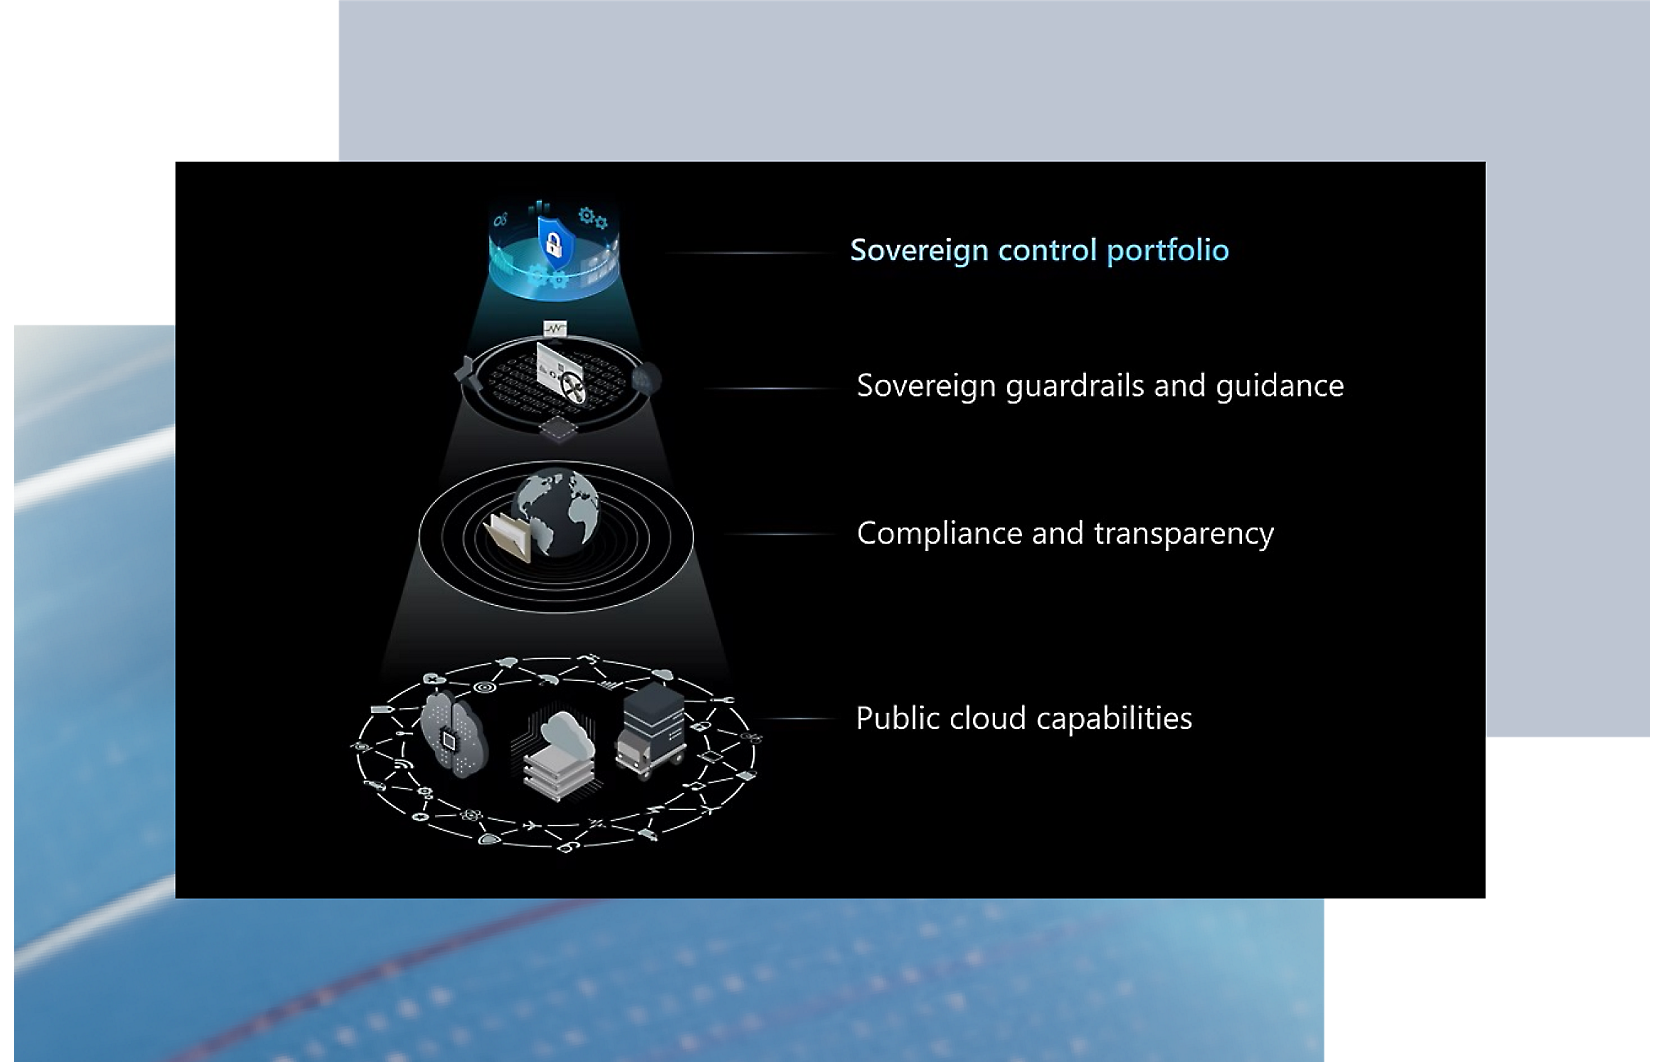 Portfolio oversight, guardrails, compliance, and cloud capabilities for sovereign entities